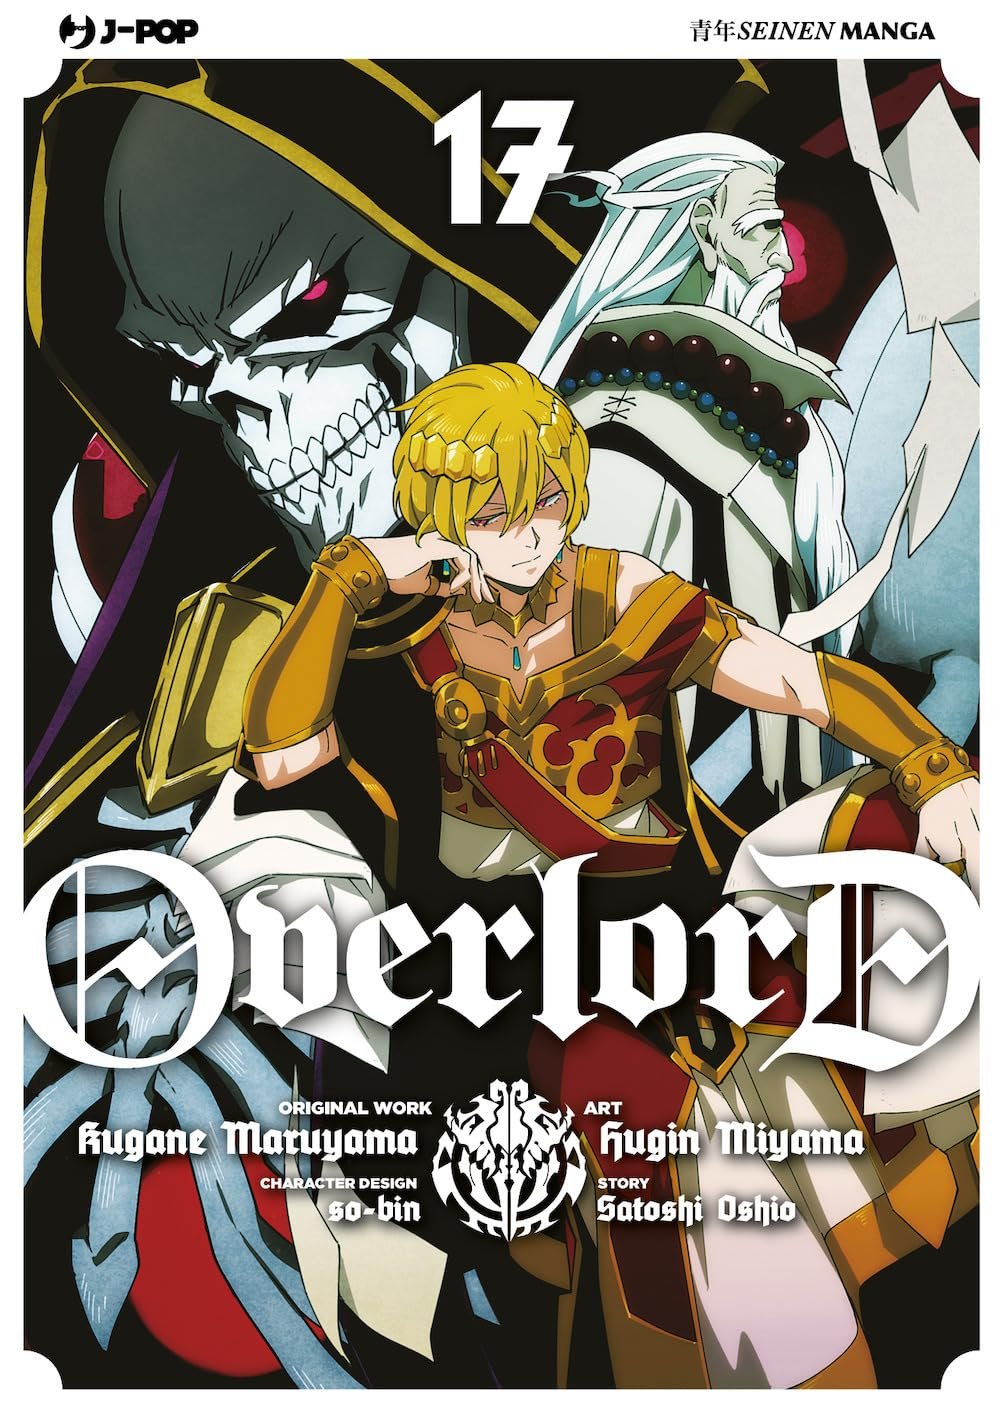 OVERLORD 17